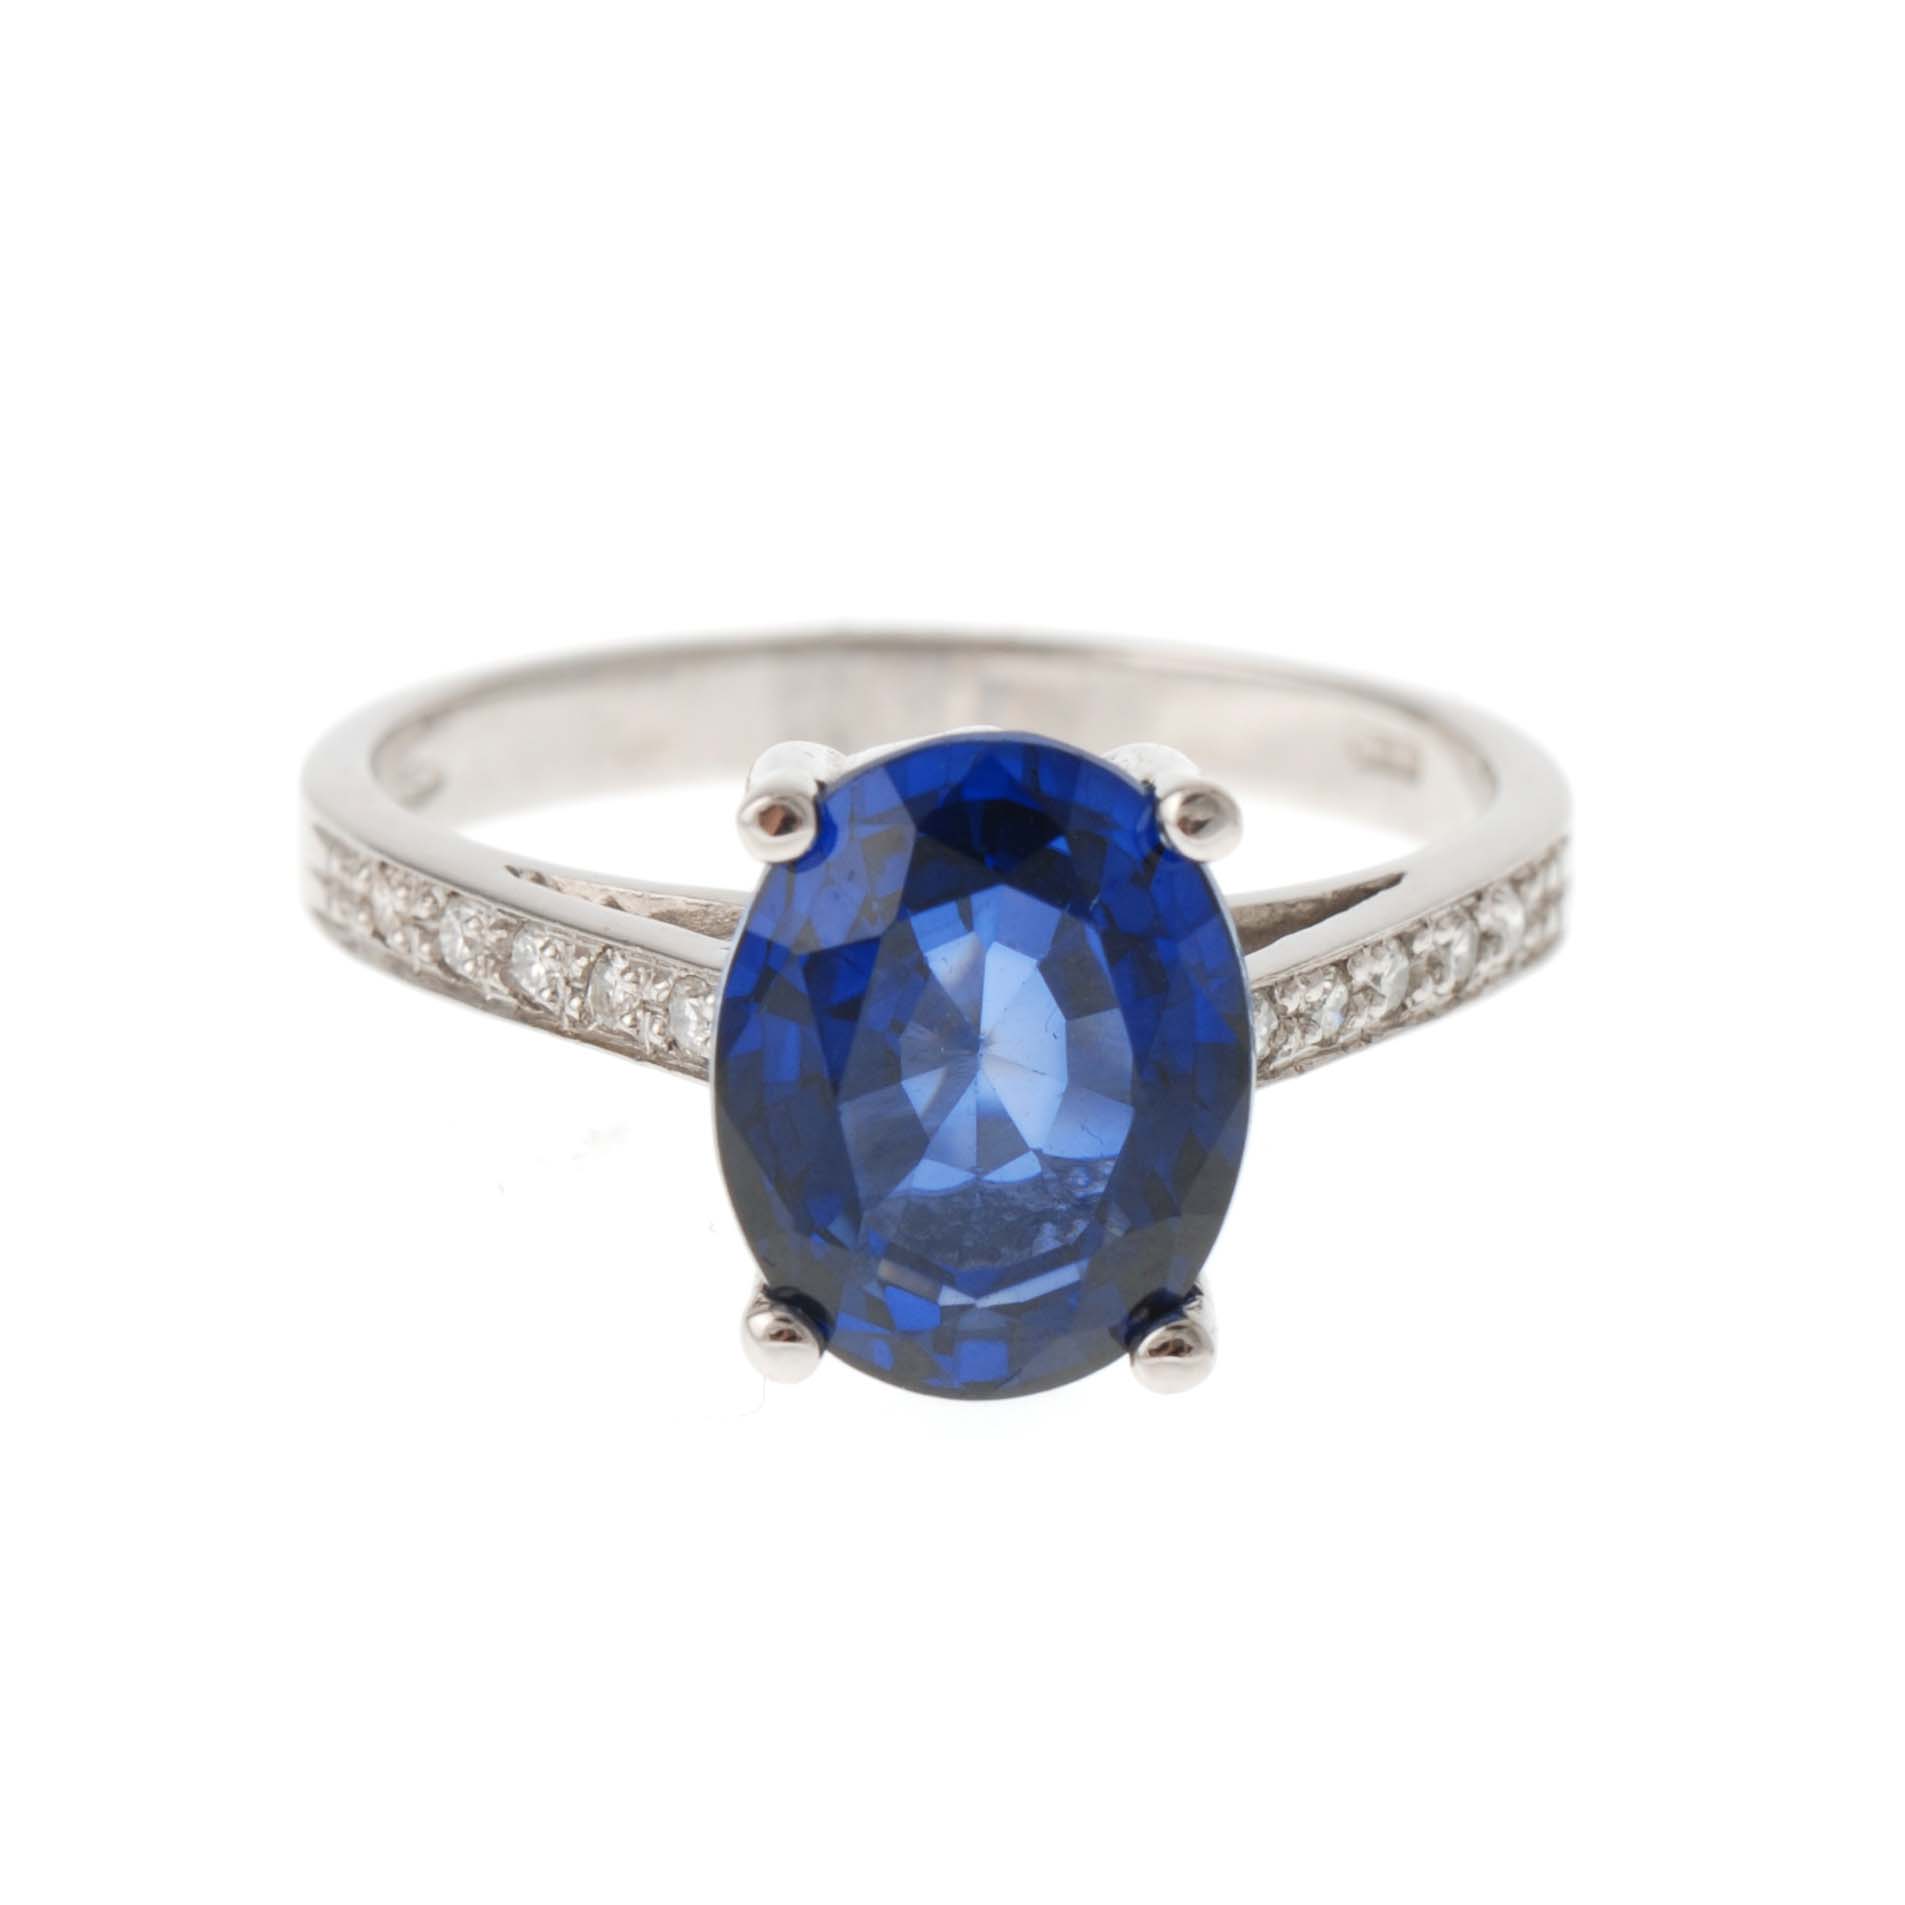 RING WITH SAPPHIRE.